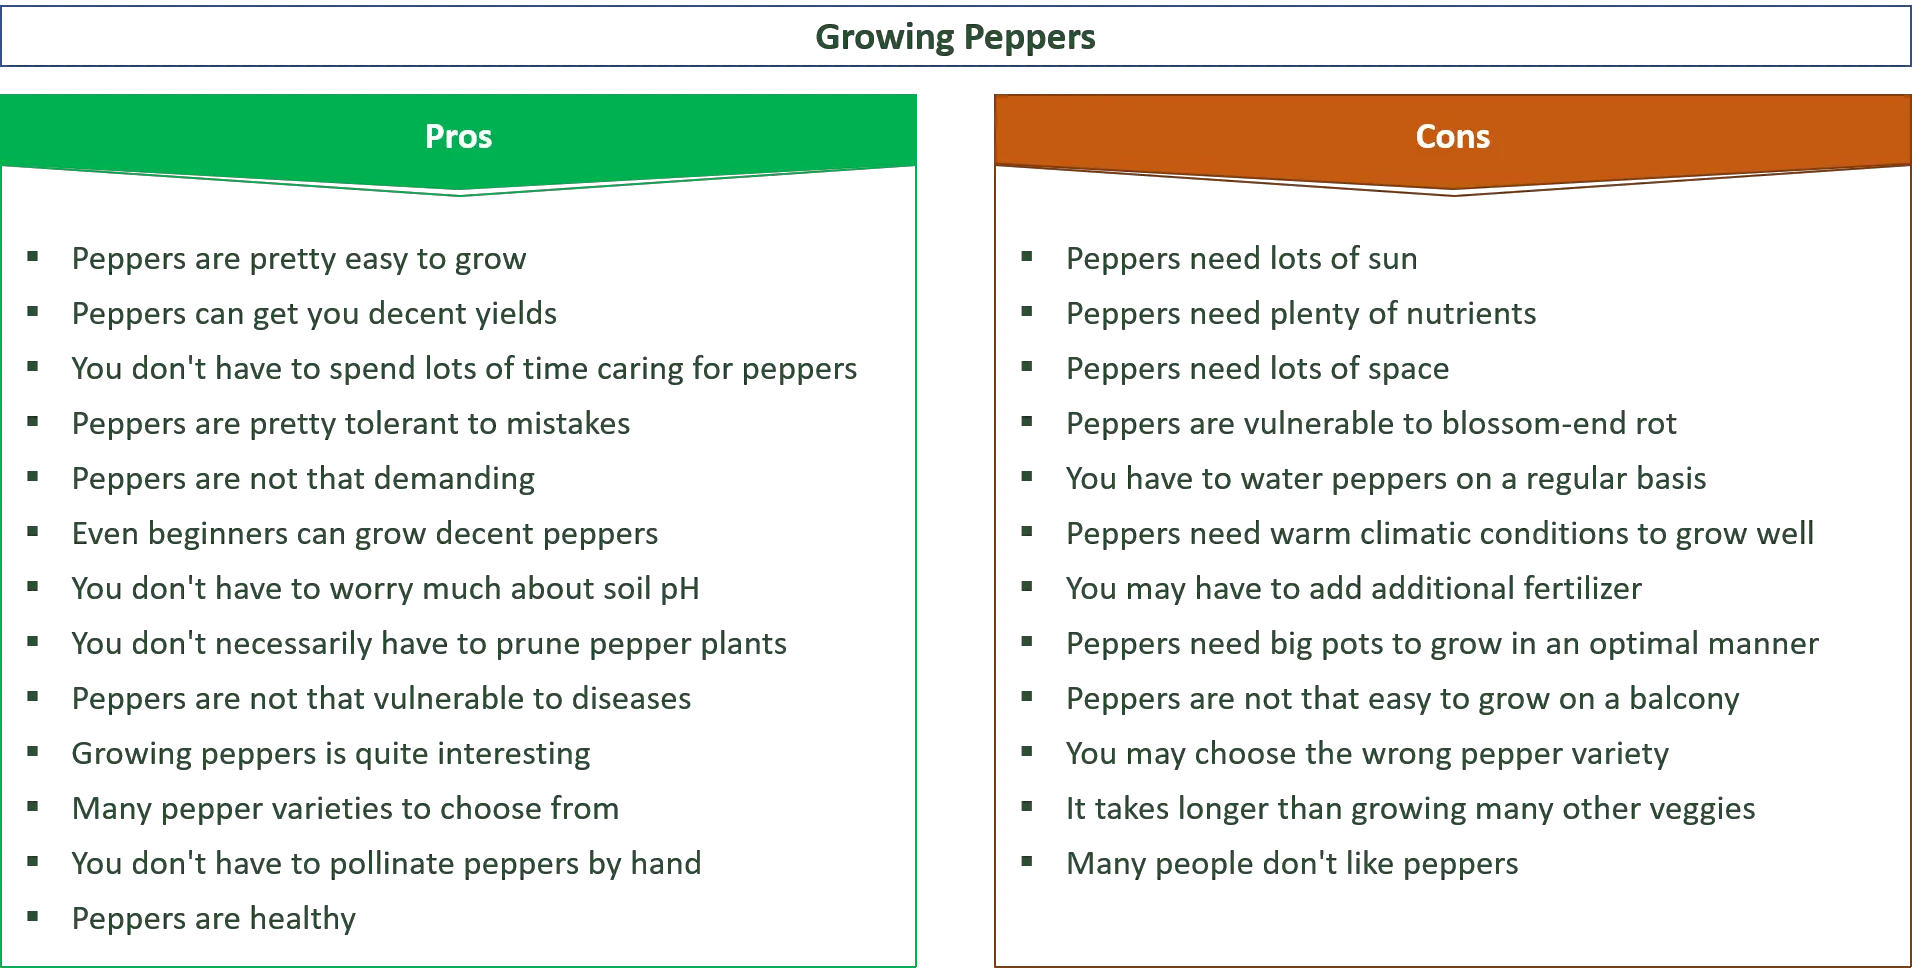 advantages and disadvantages of growing peppers